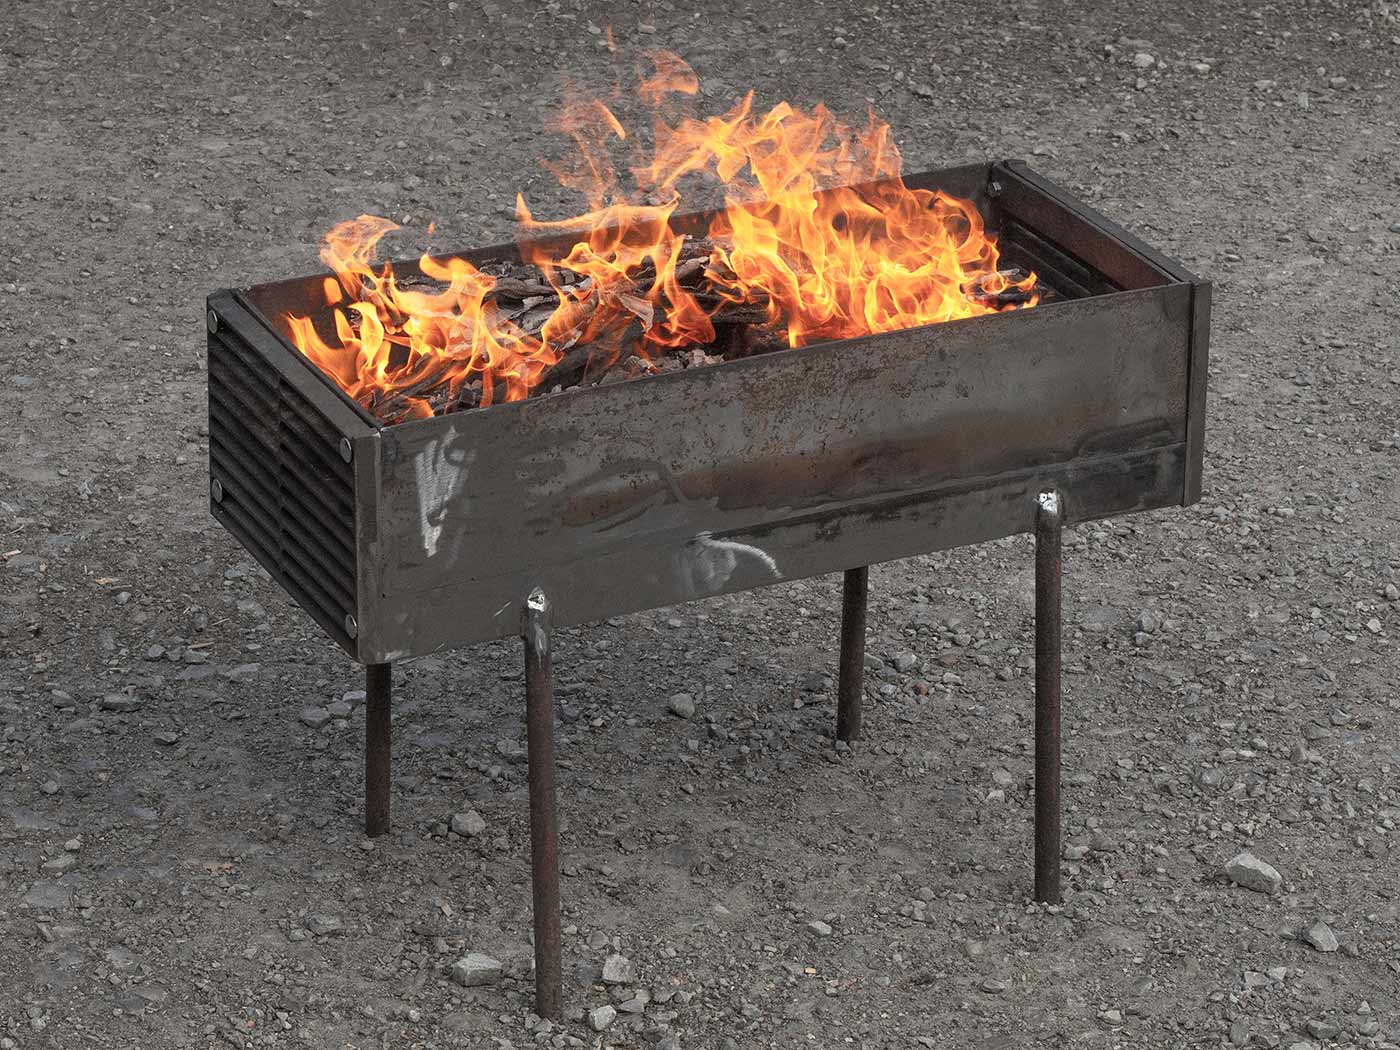 A rectangular steel volume that is open at the top. There are air slots in the head ends. The object stands on 4 thin legs, a fire burns inside the volume.